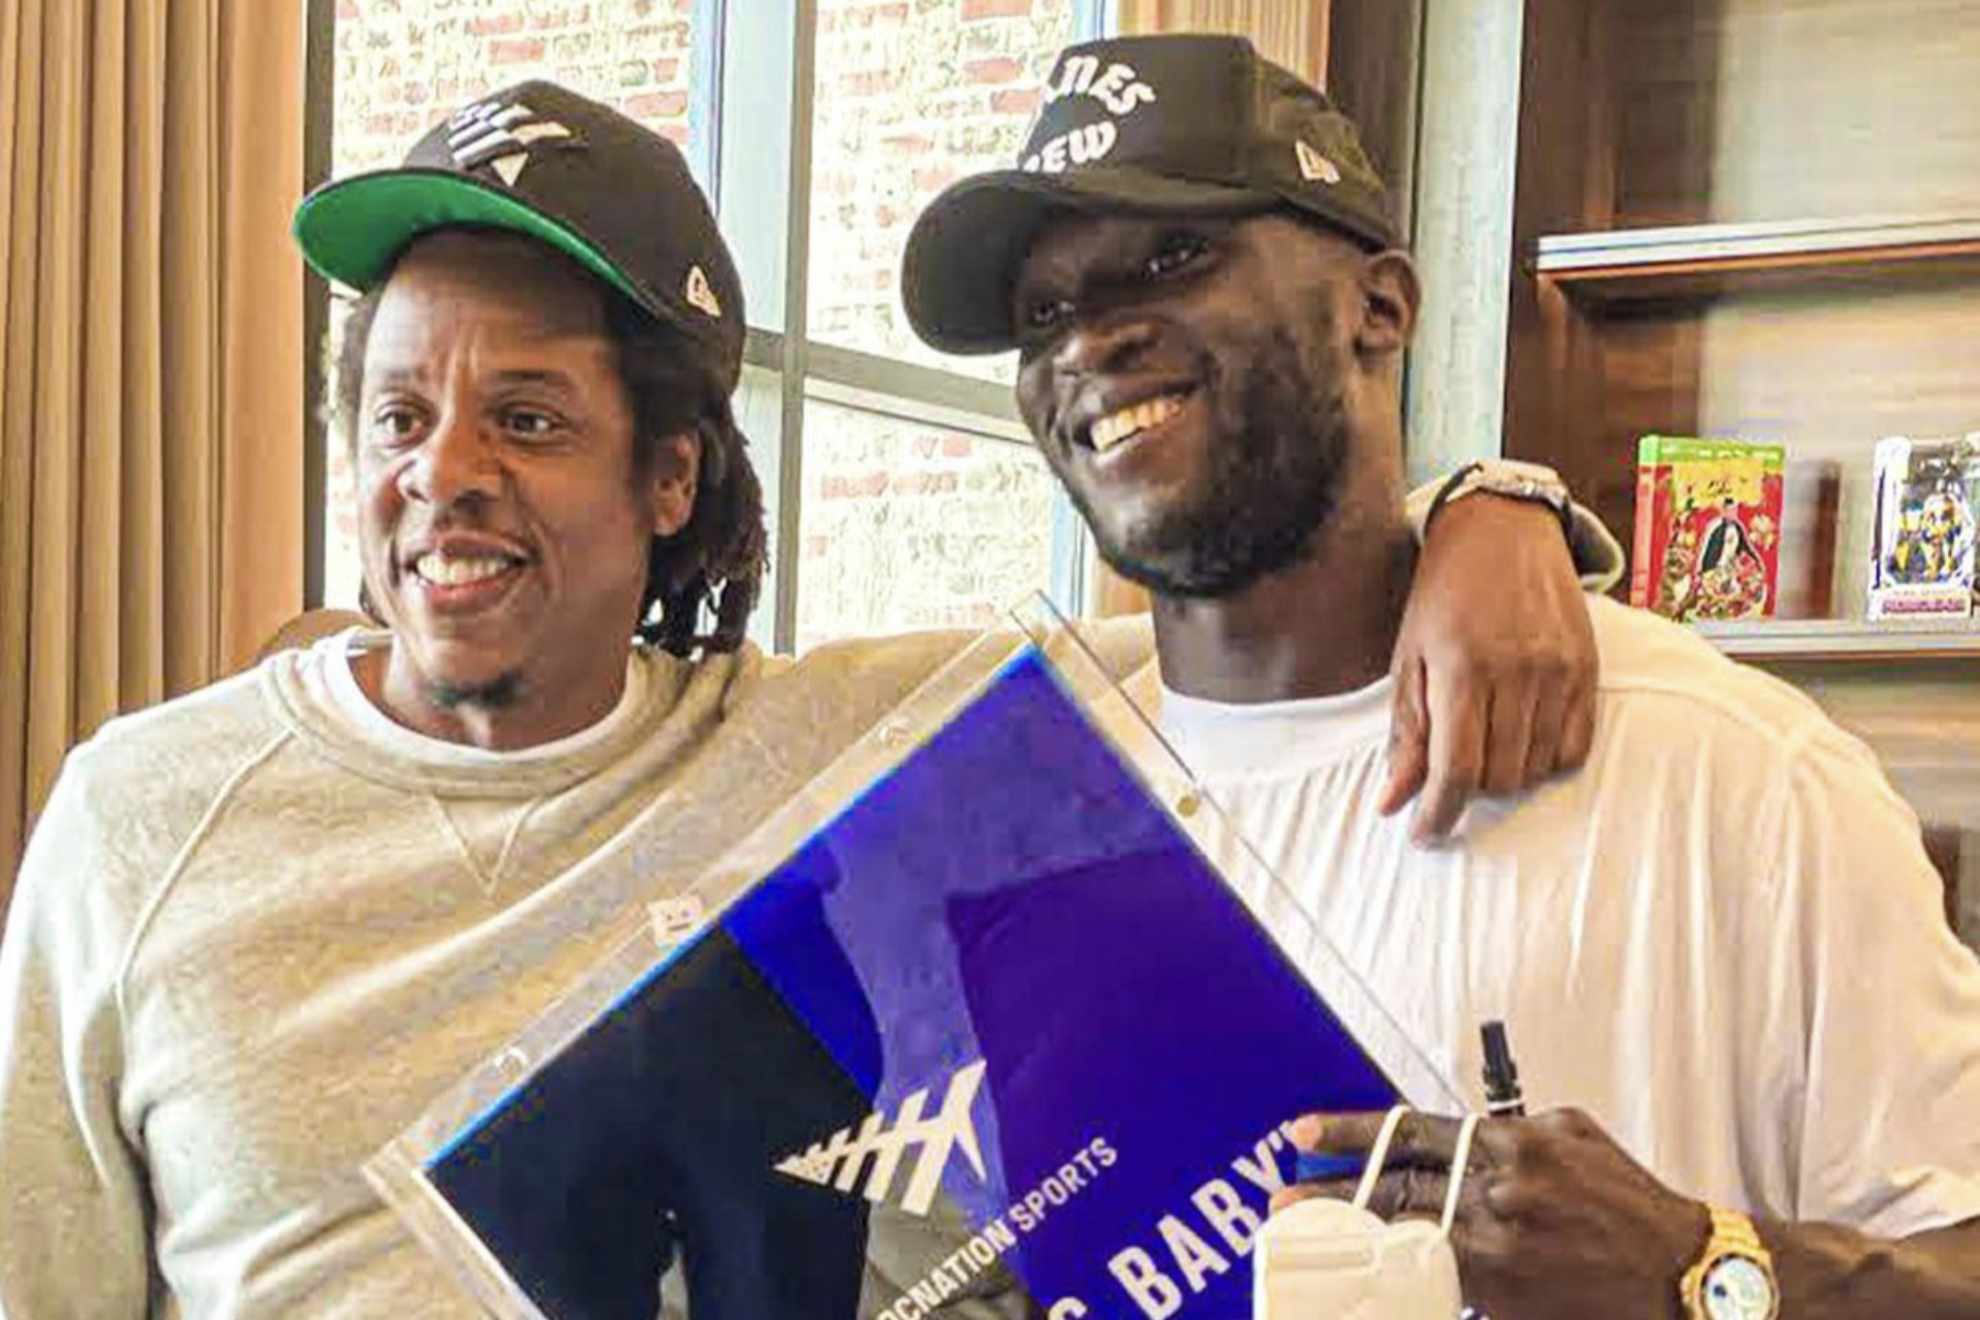 Jay-Z (left) and Romelu Lukaku have met several times throughout the years.